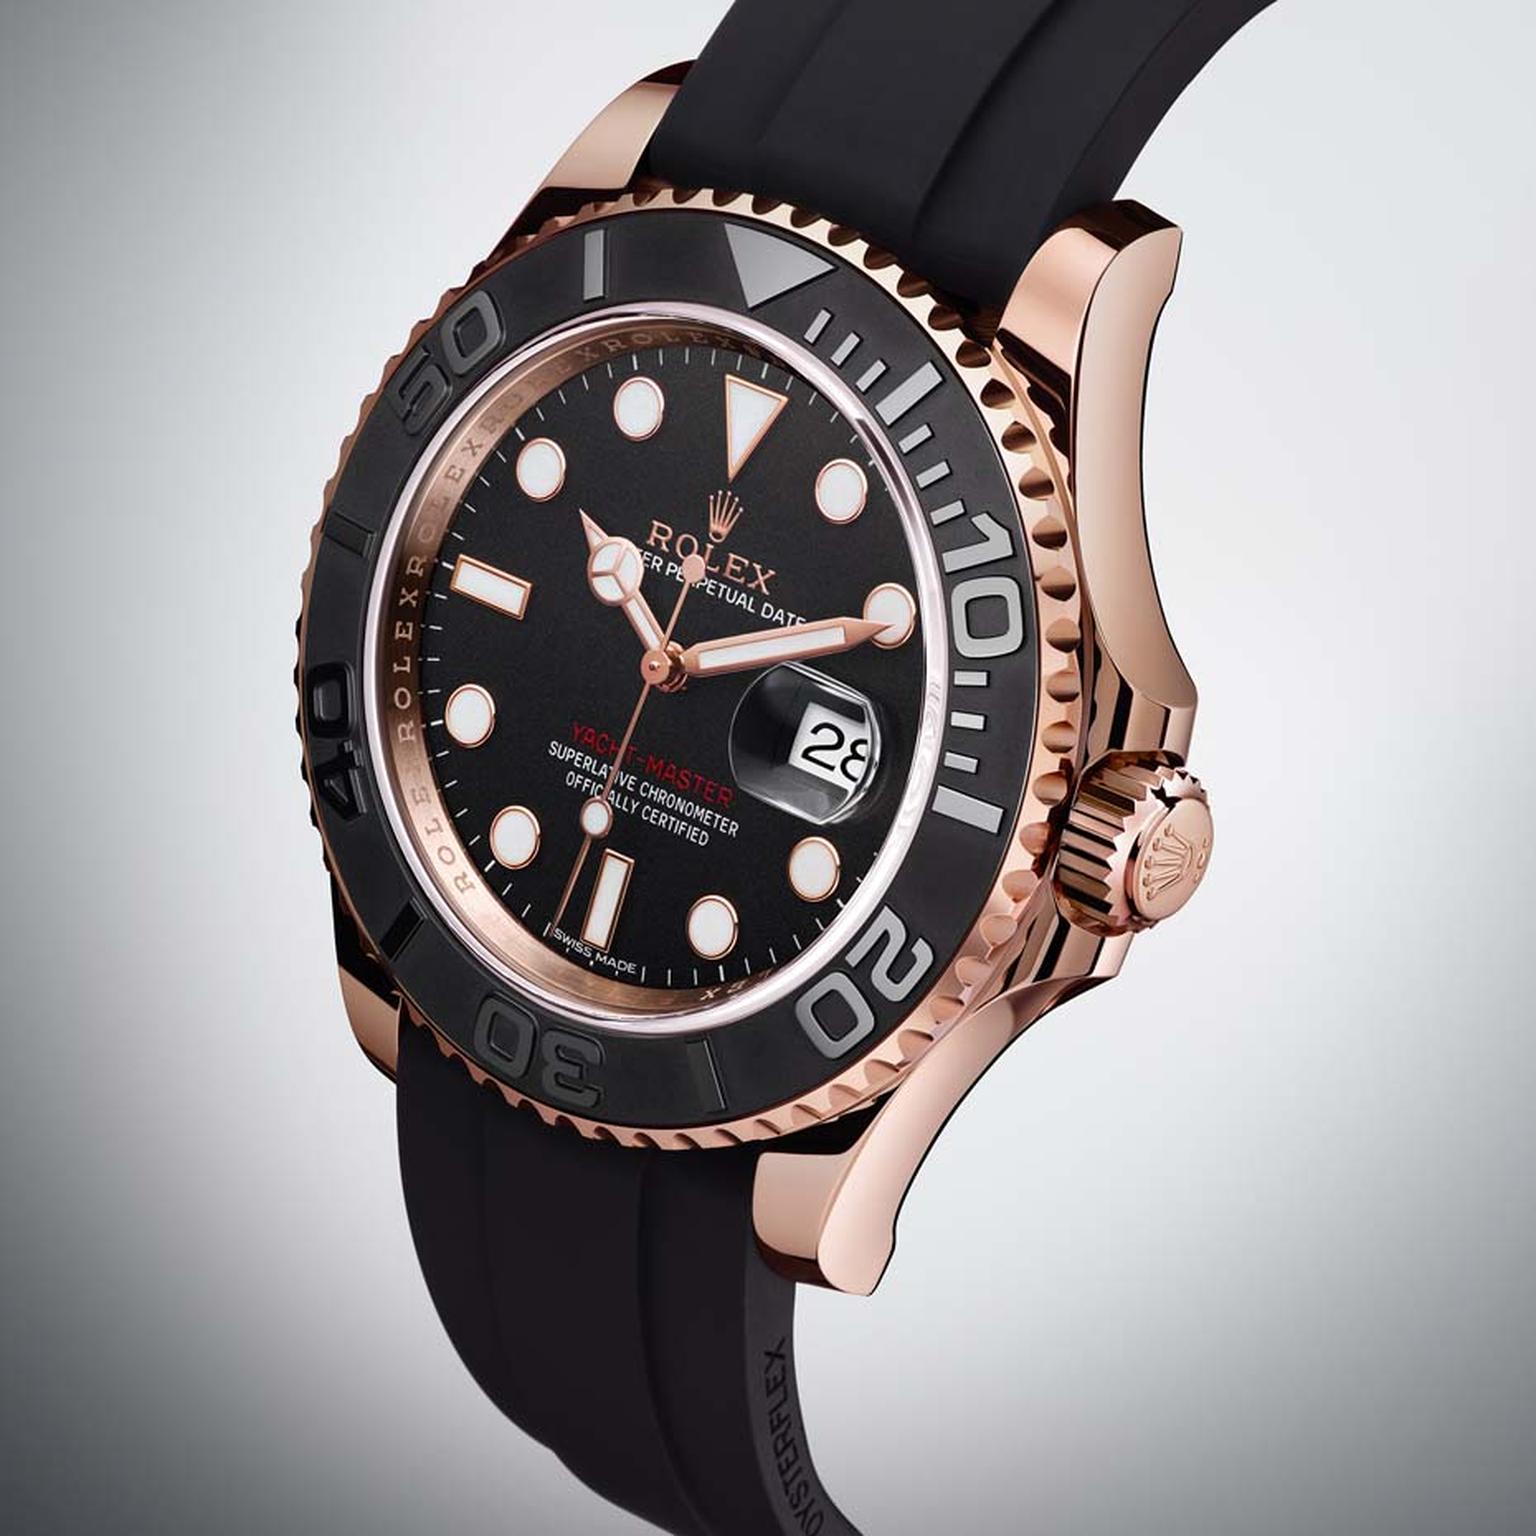 Rolex's new Yacht-Master in a 40mm Everose gold case boasts a new Cerachrom insert in black ceramic fitted in the rotating bezel on the dial. The raised and polished numerals stand out clearly against the matte black ceramic and are designed to measure el